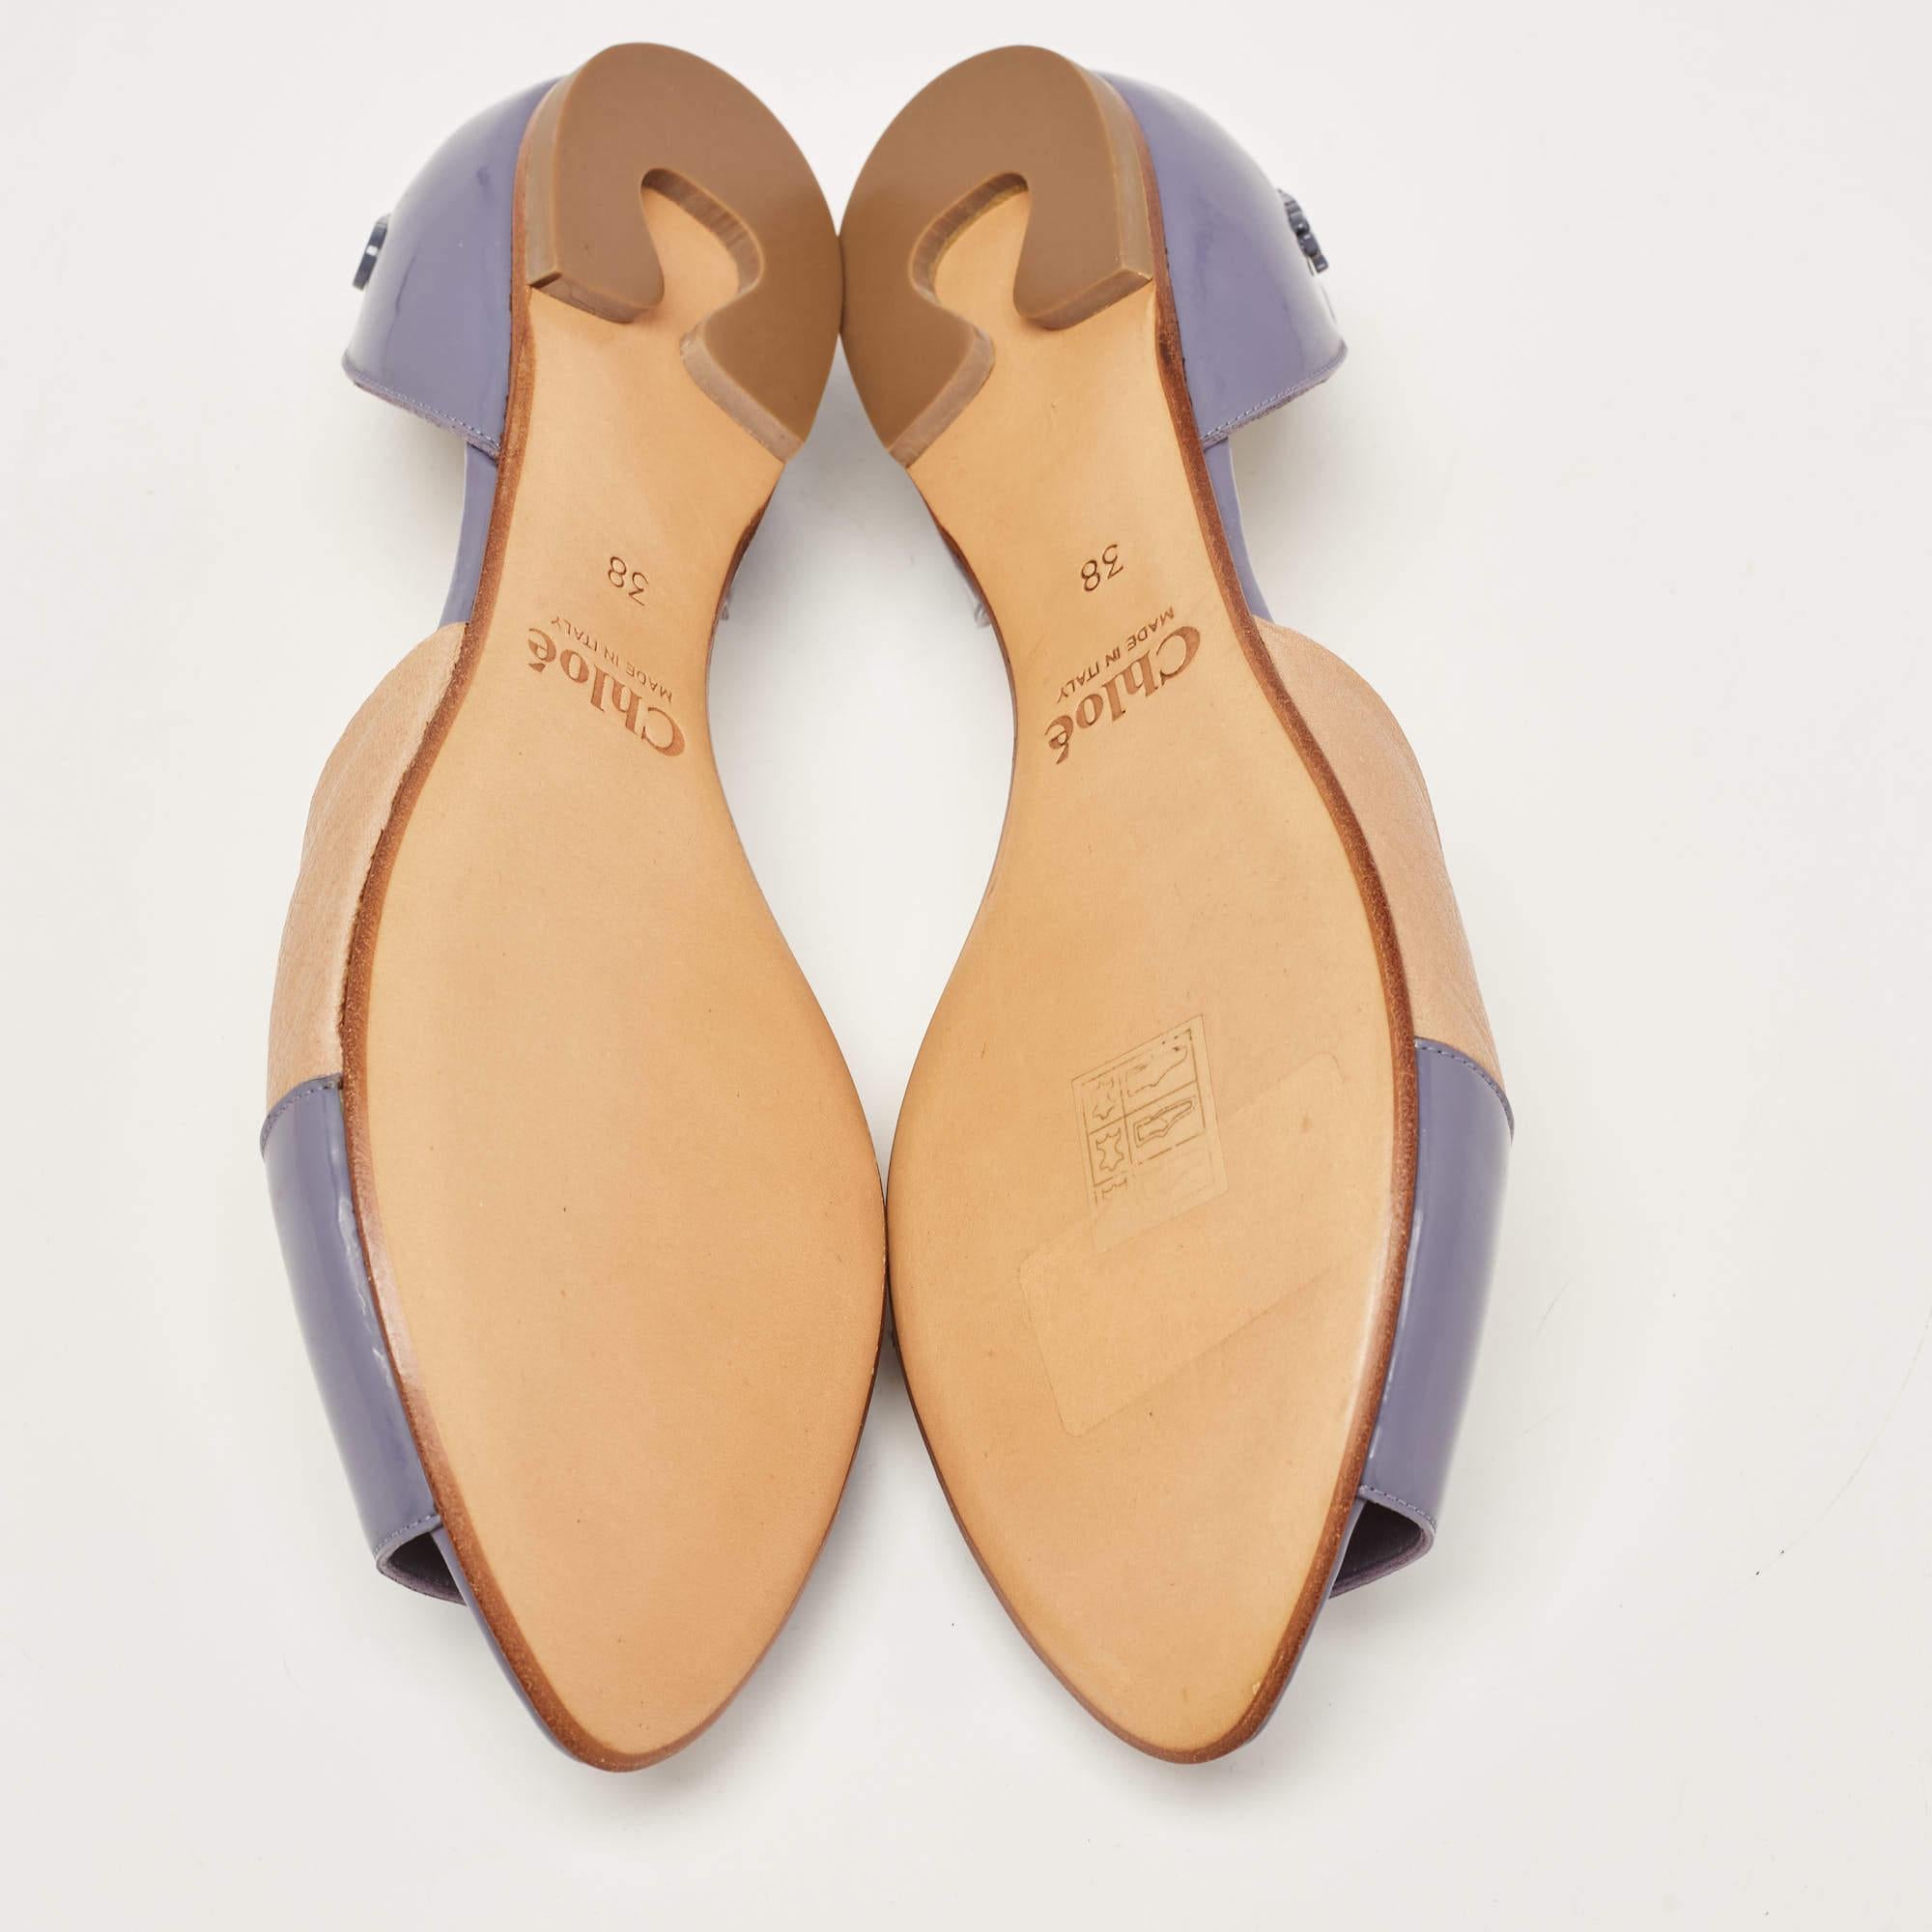 Chloé Blue/Brown Leather Open Toe D'orsay Flats Size 38 1